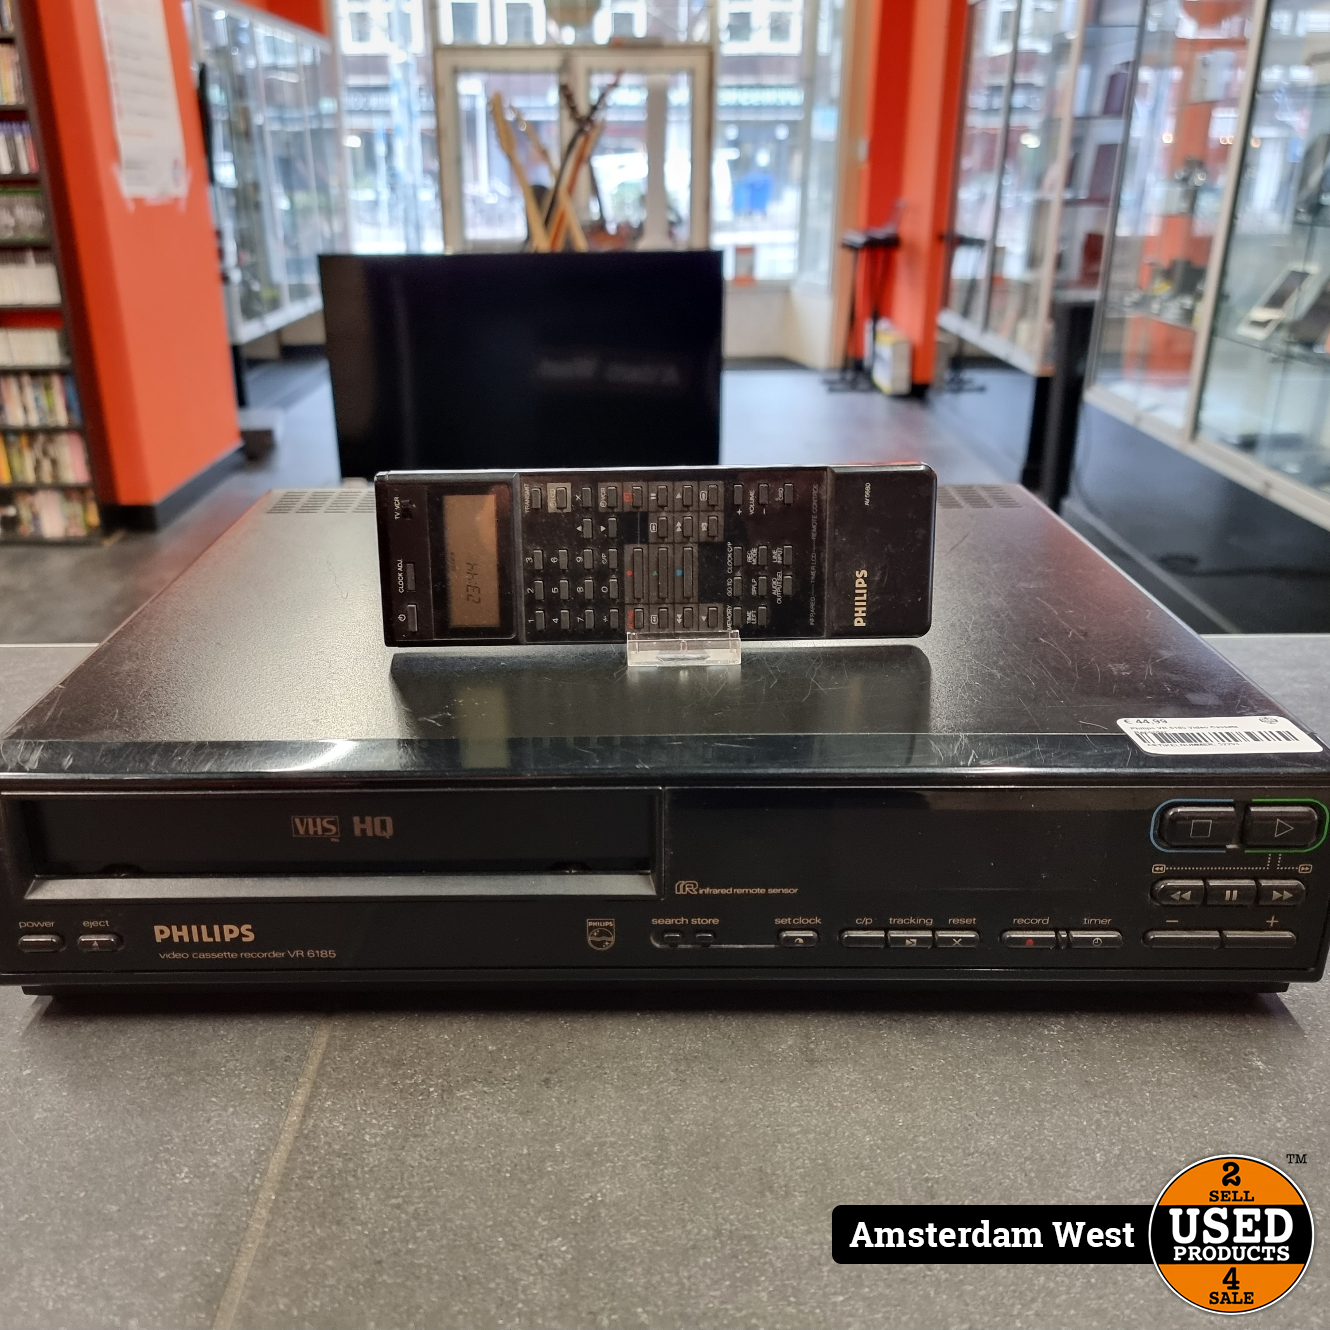 Philips VR 6185 Video Cassete Recorder - Used Products Amsterdam West